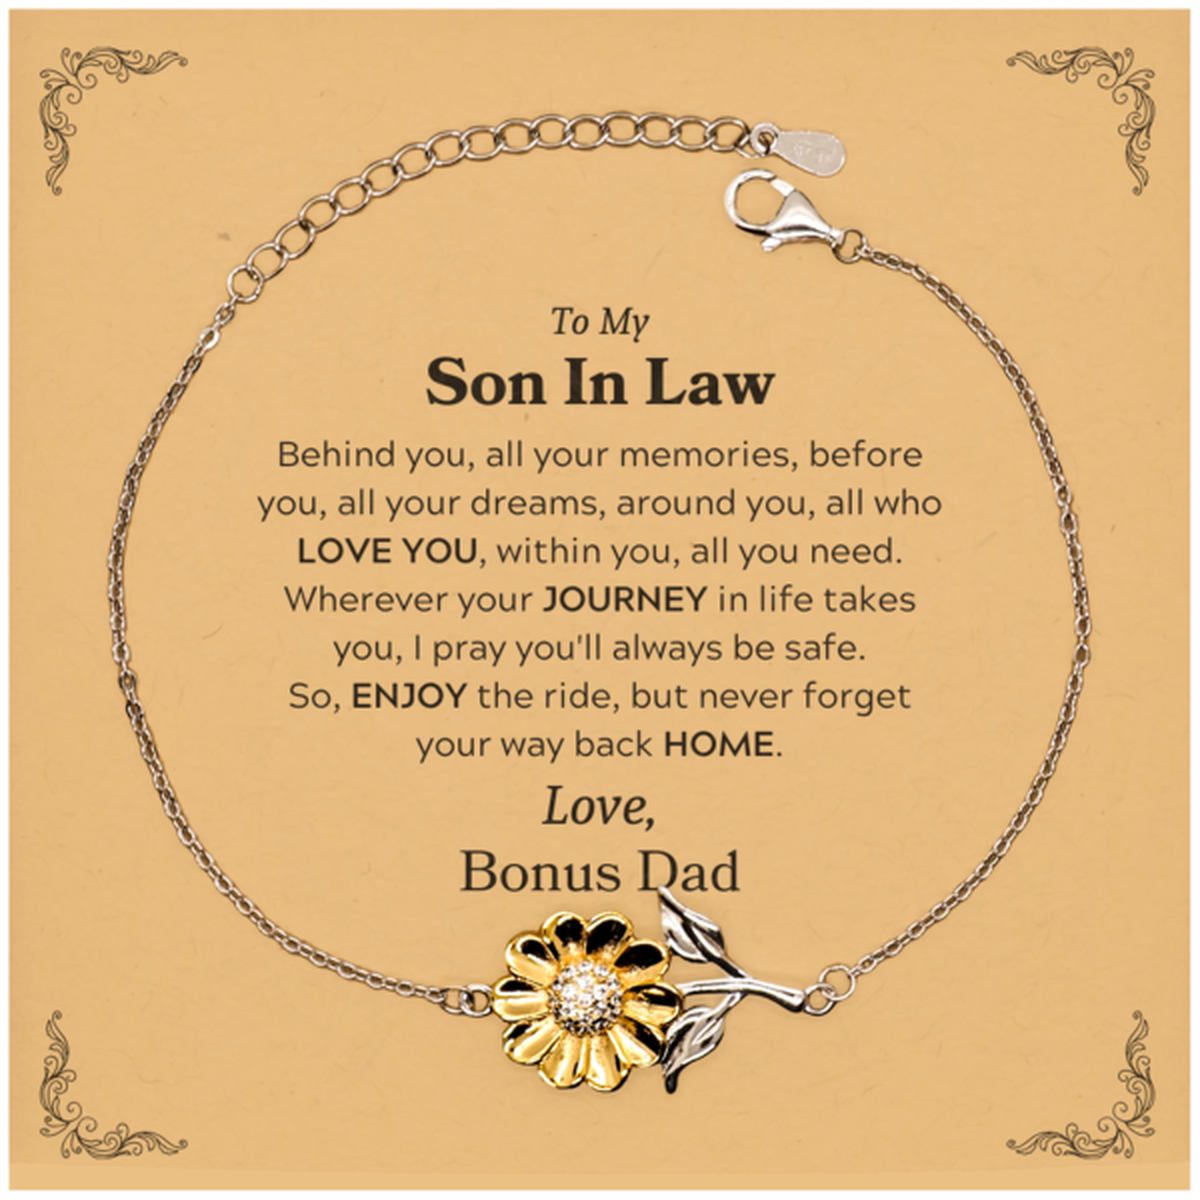 To My Son In Law Graduation Gifts from Bonus Dad, Son In Law Sunflower Bracelet Christmas Birthday Gifts for Son In Law Behind you, all your memories, before you, all your dreams. Love, Bonus Dad